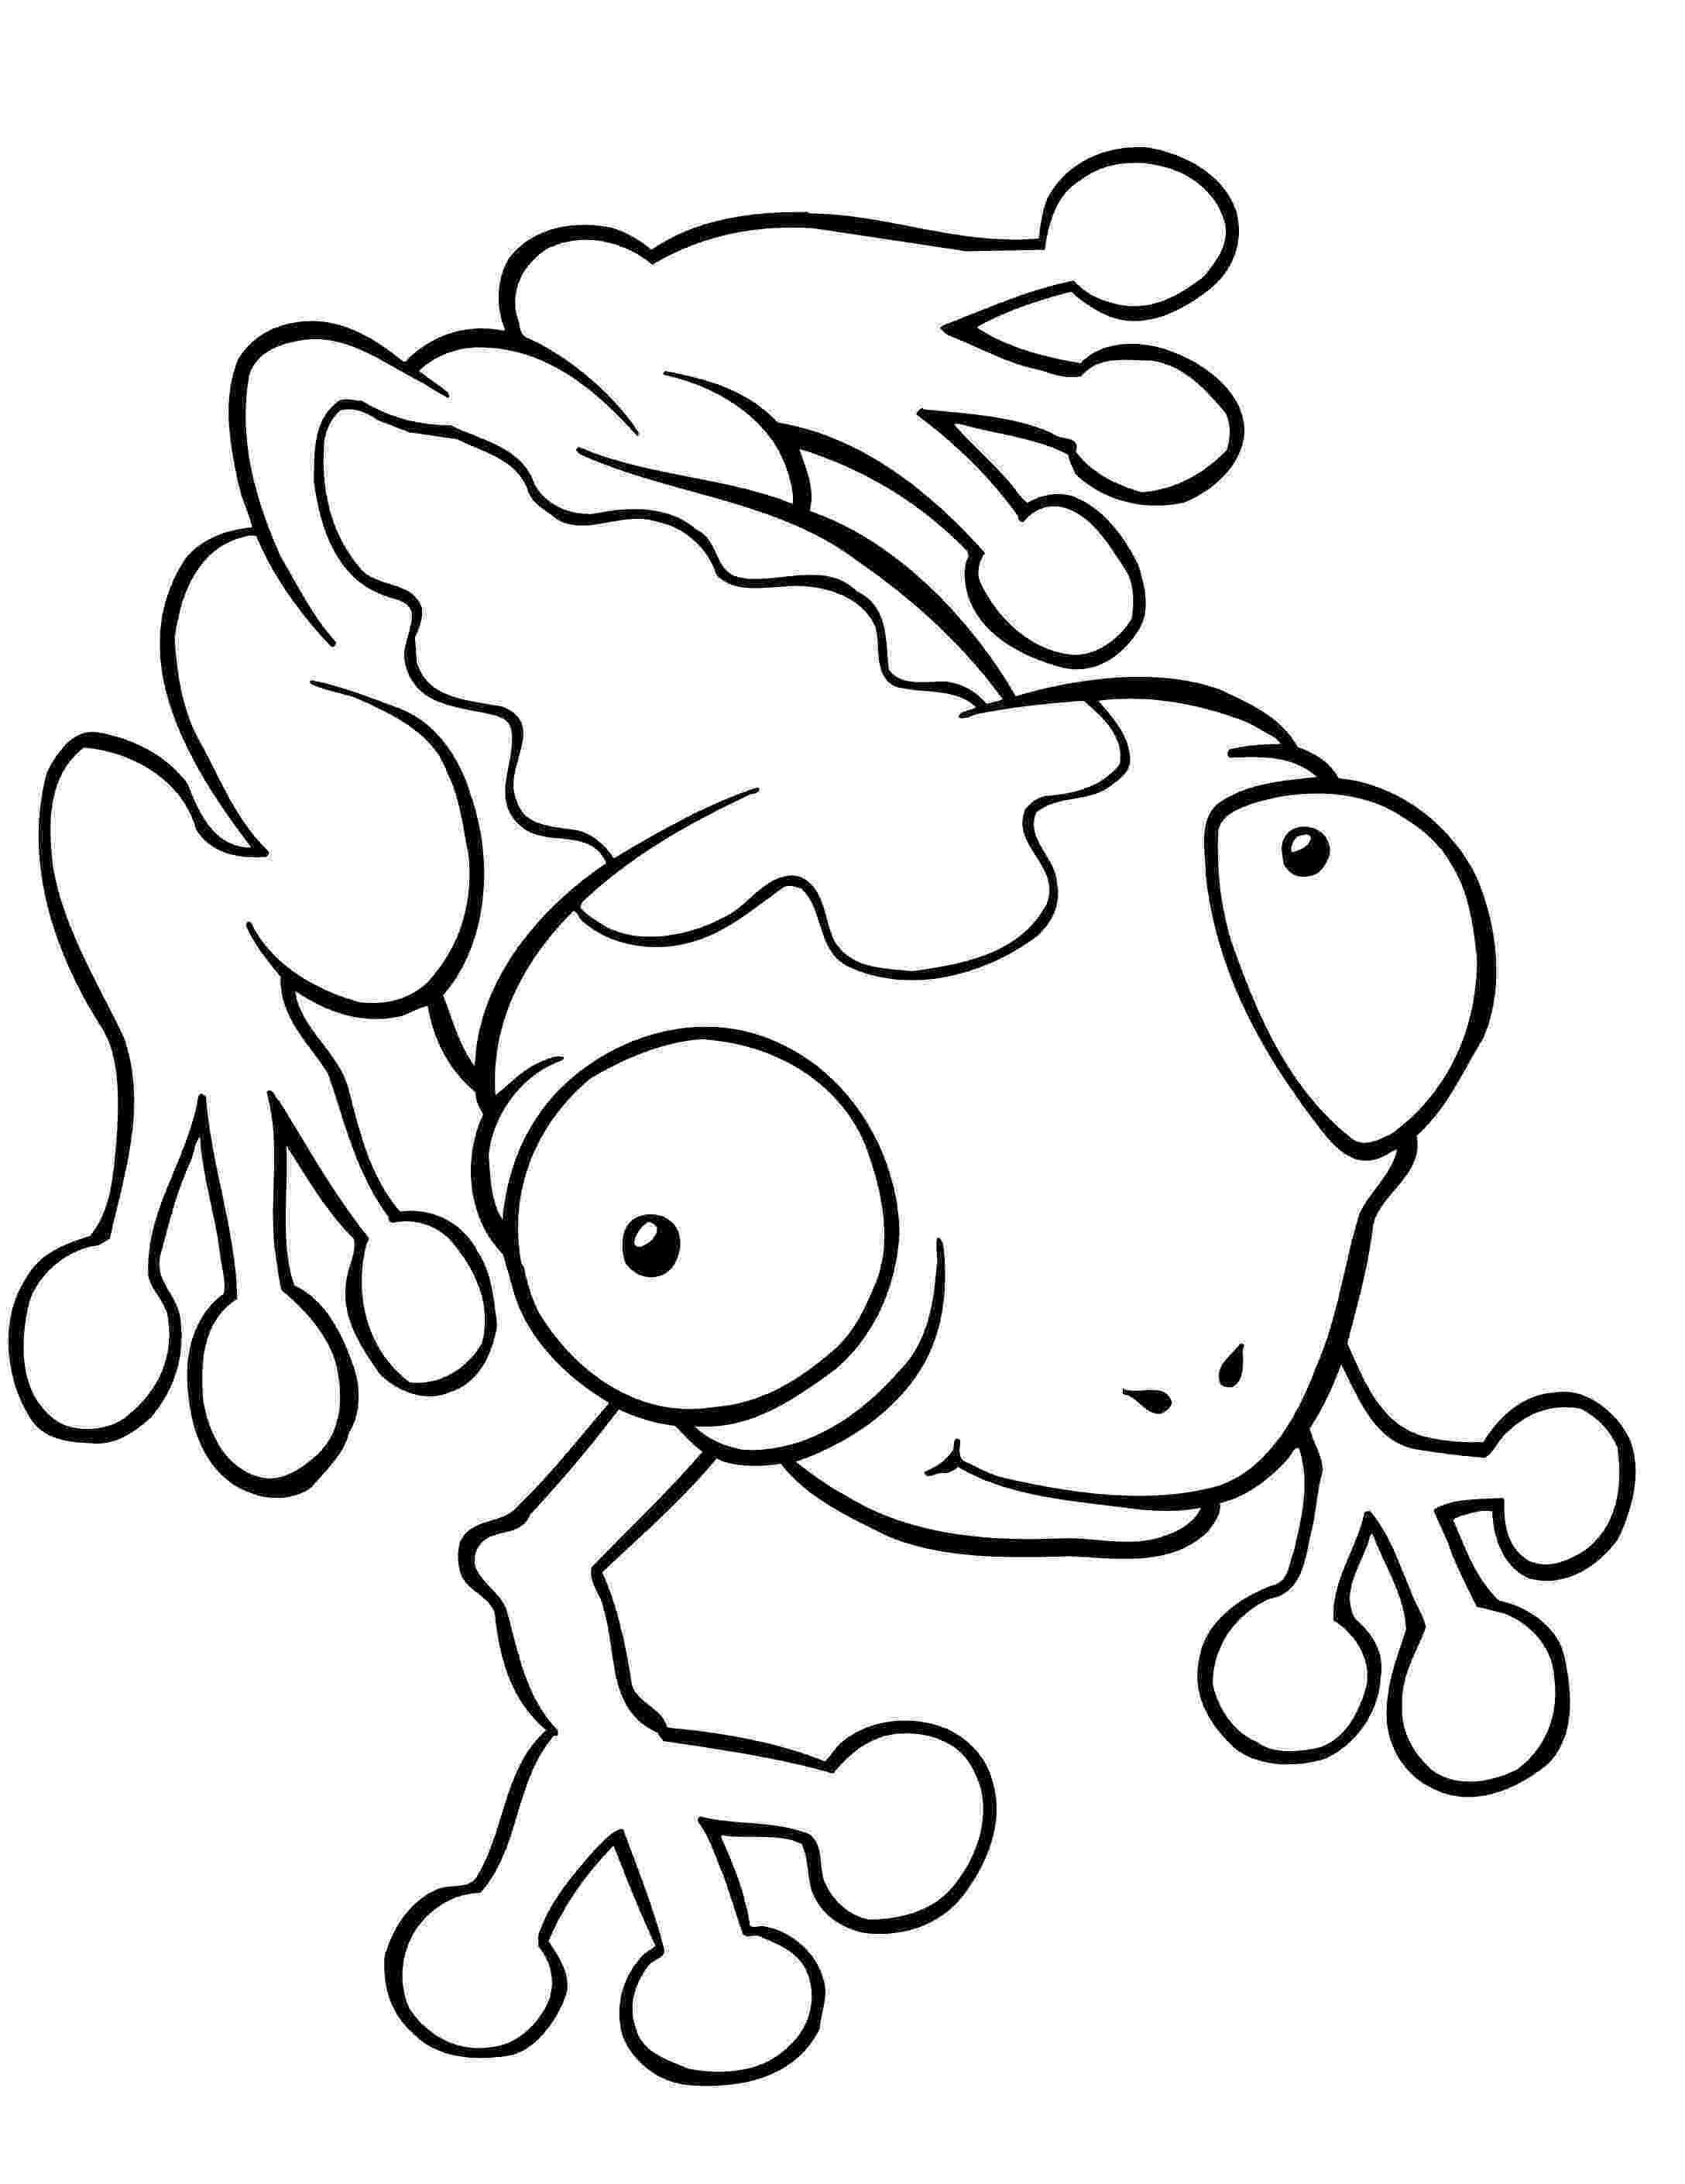 amphibian coloring pages frogs coloring pages to download and print for free coloring amphibian pages 